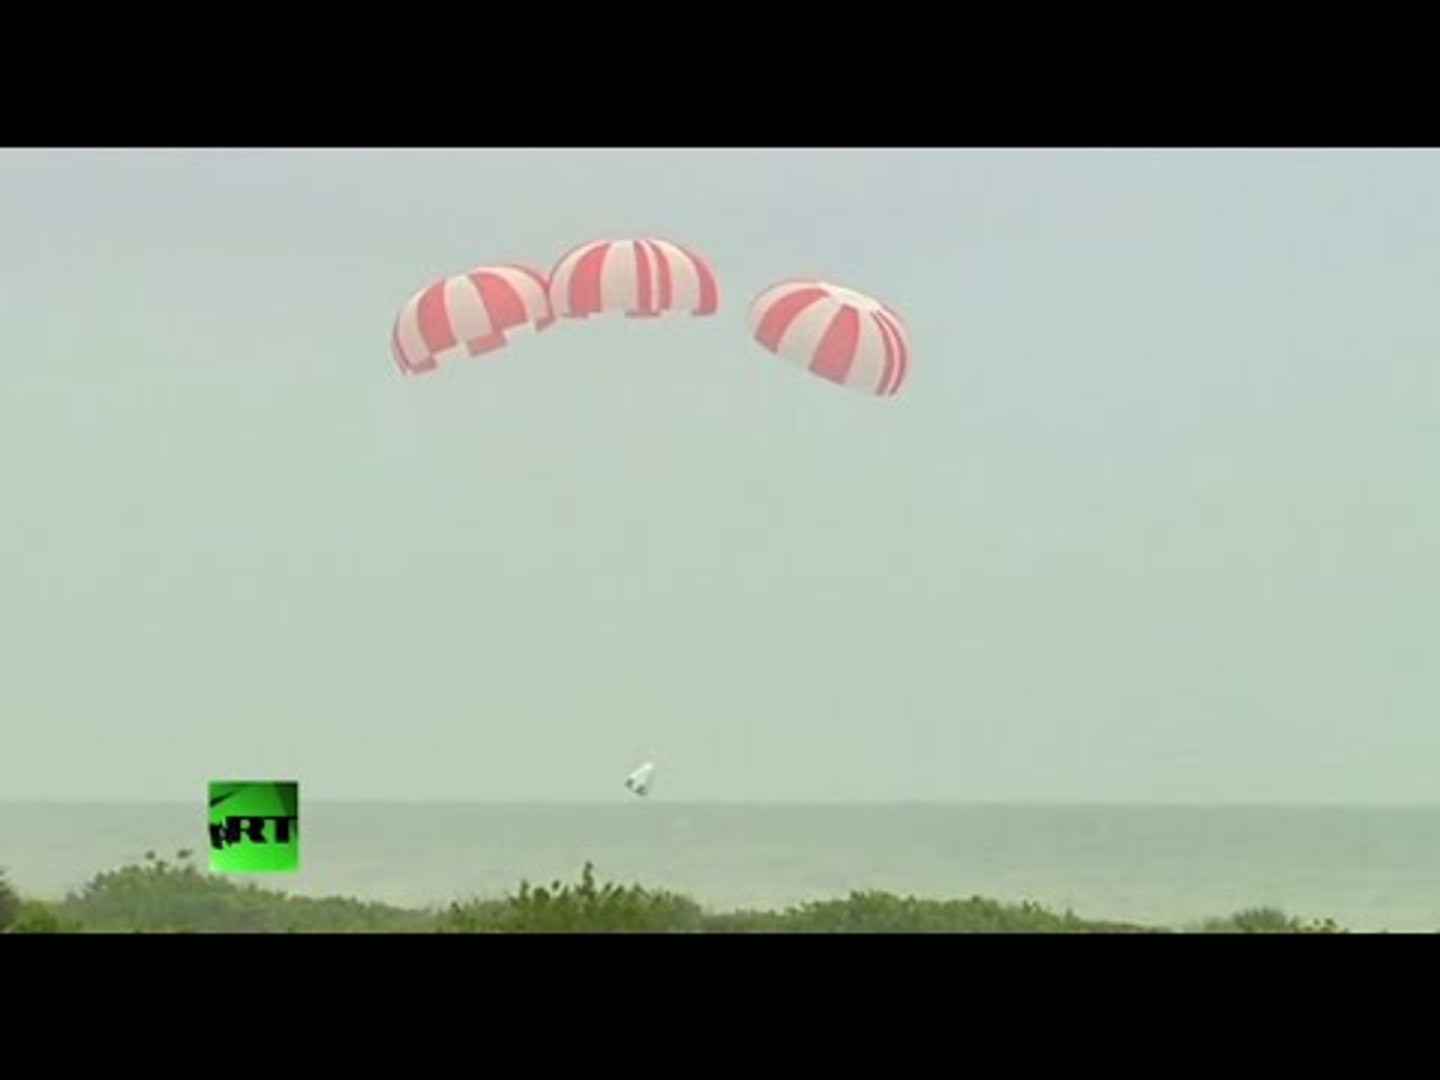 RAW: SpaceX tests new astronaut escape system